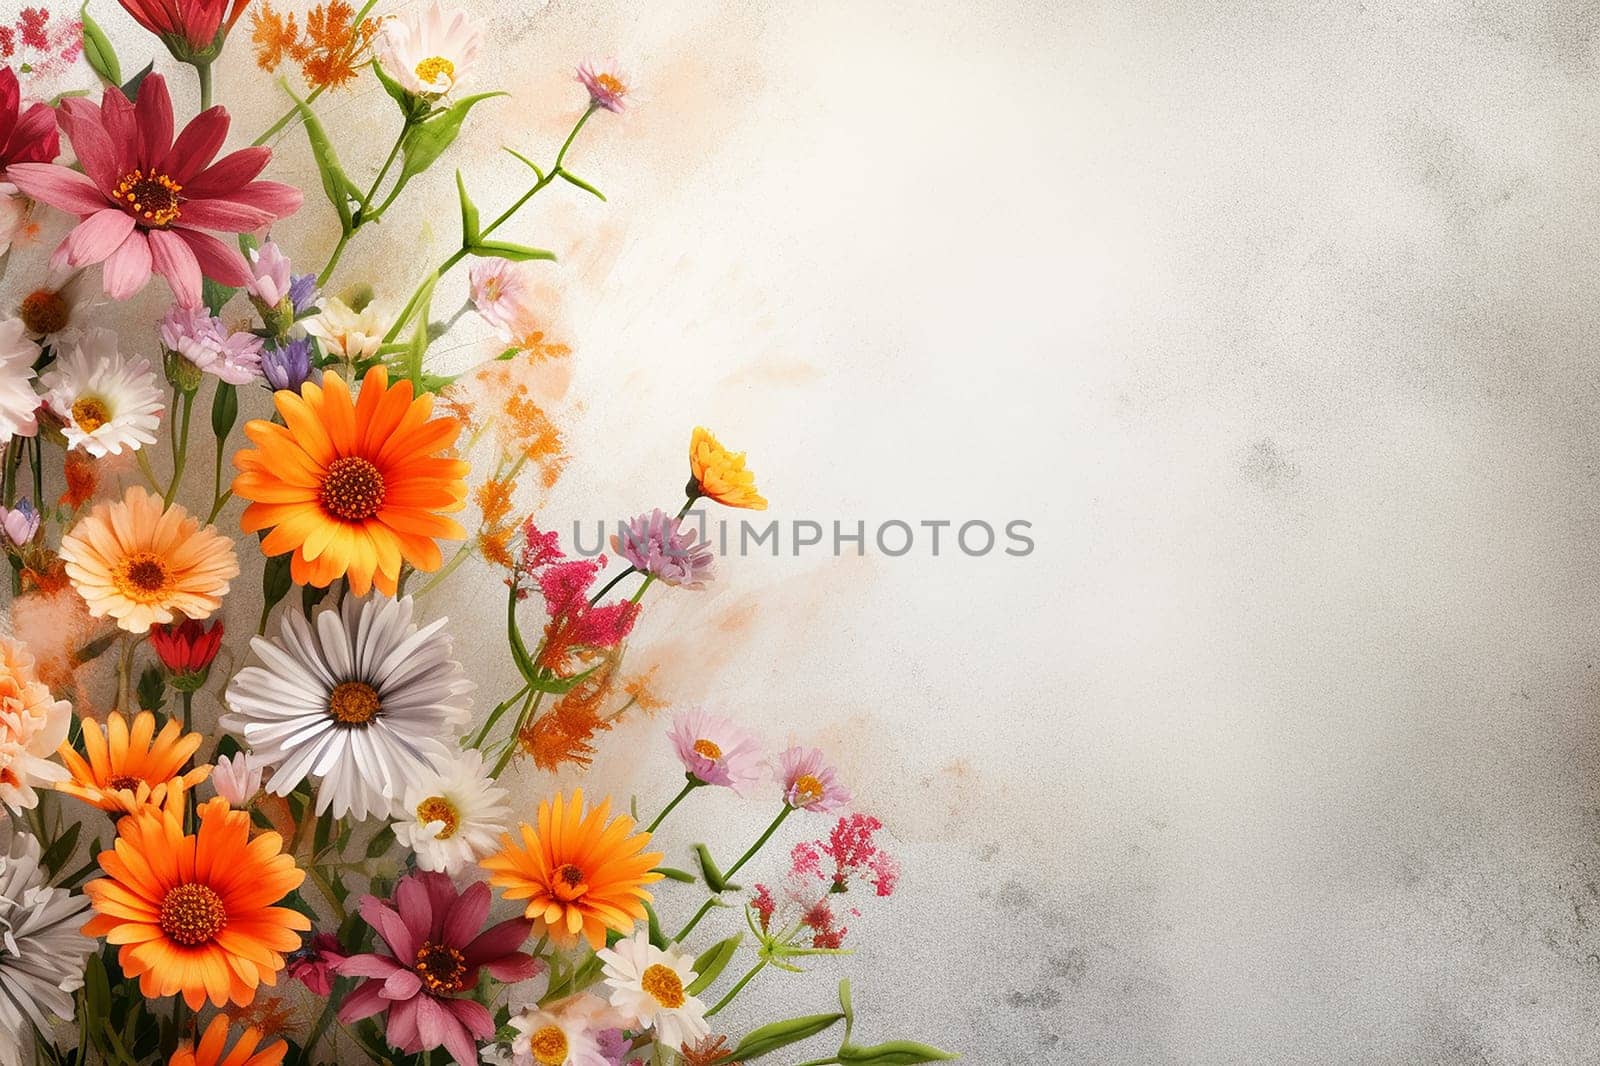 Colorful flowers on a textured cream background.